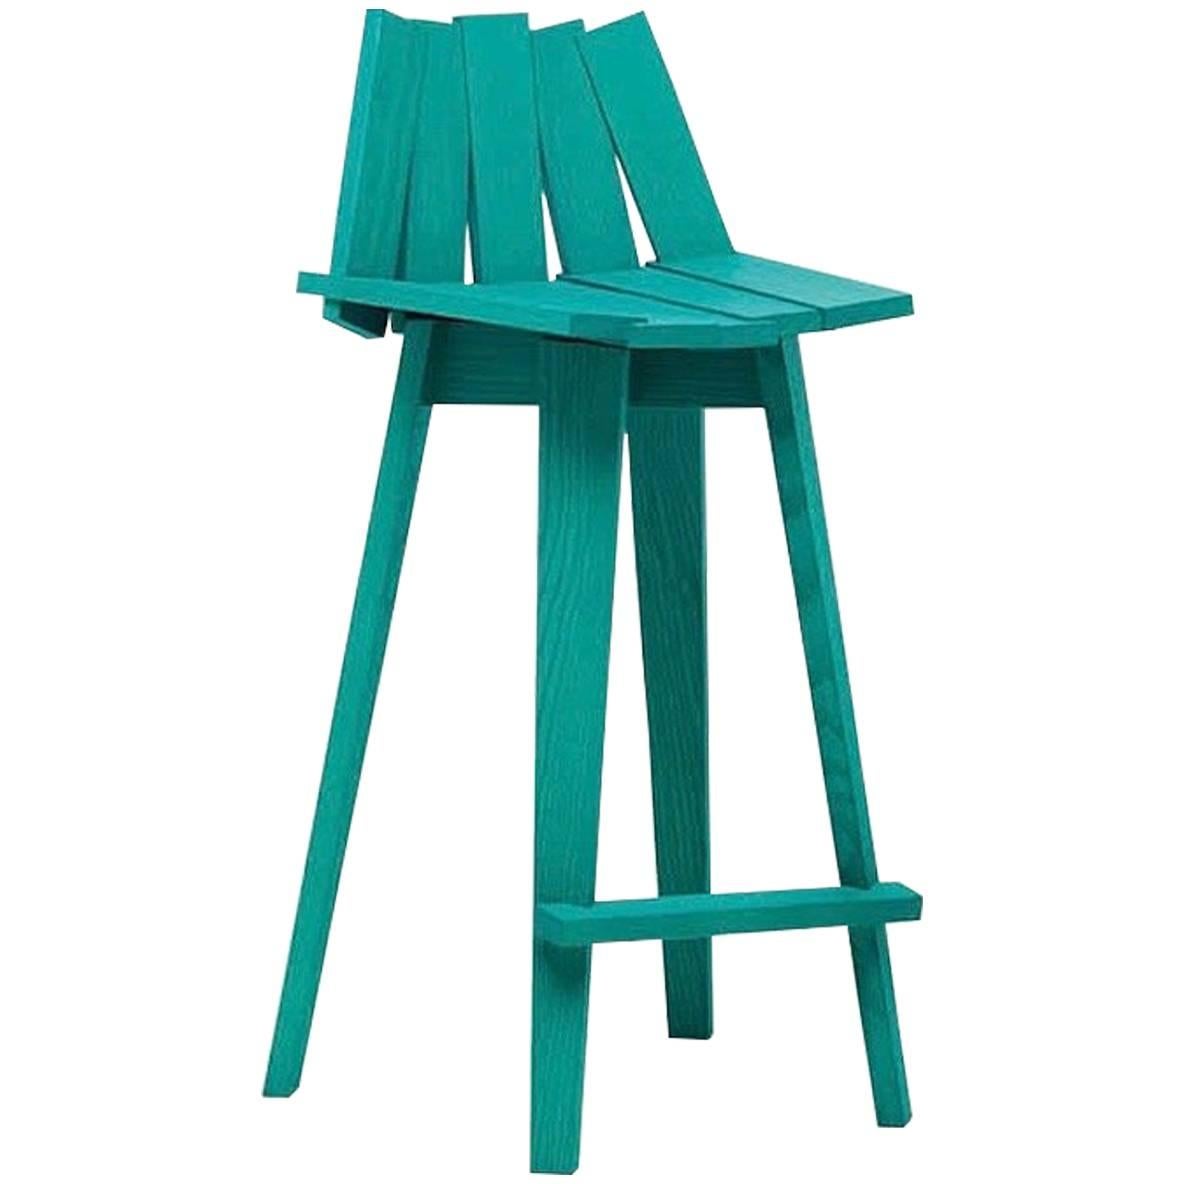 Frank Stool in Teal Finish by Alessandra Baldereschi & Mogg For Sale